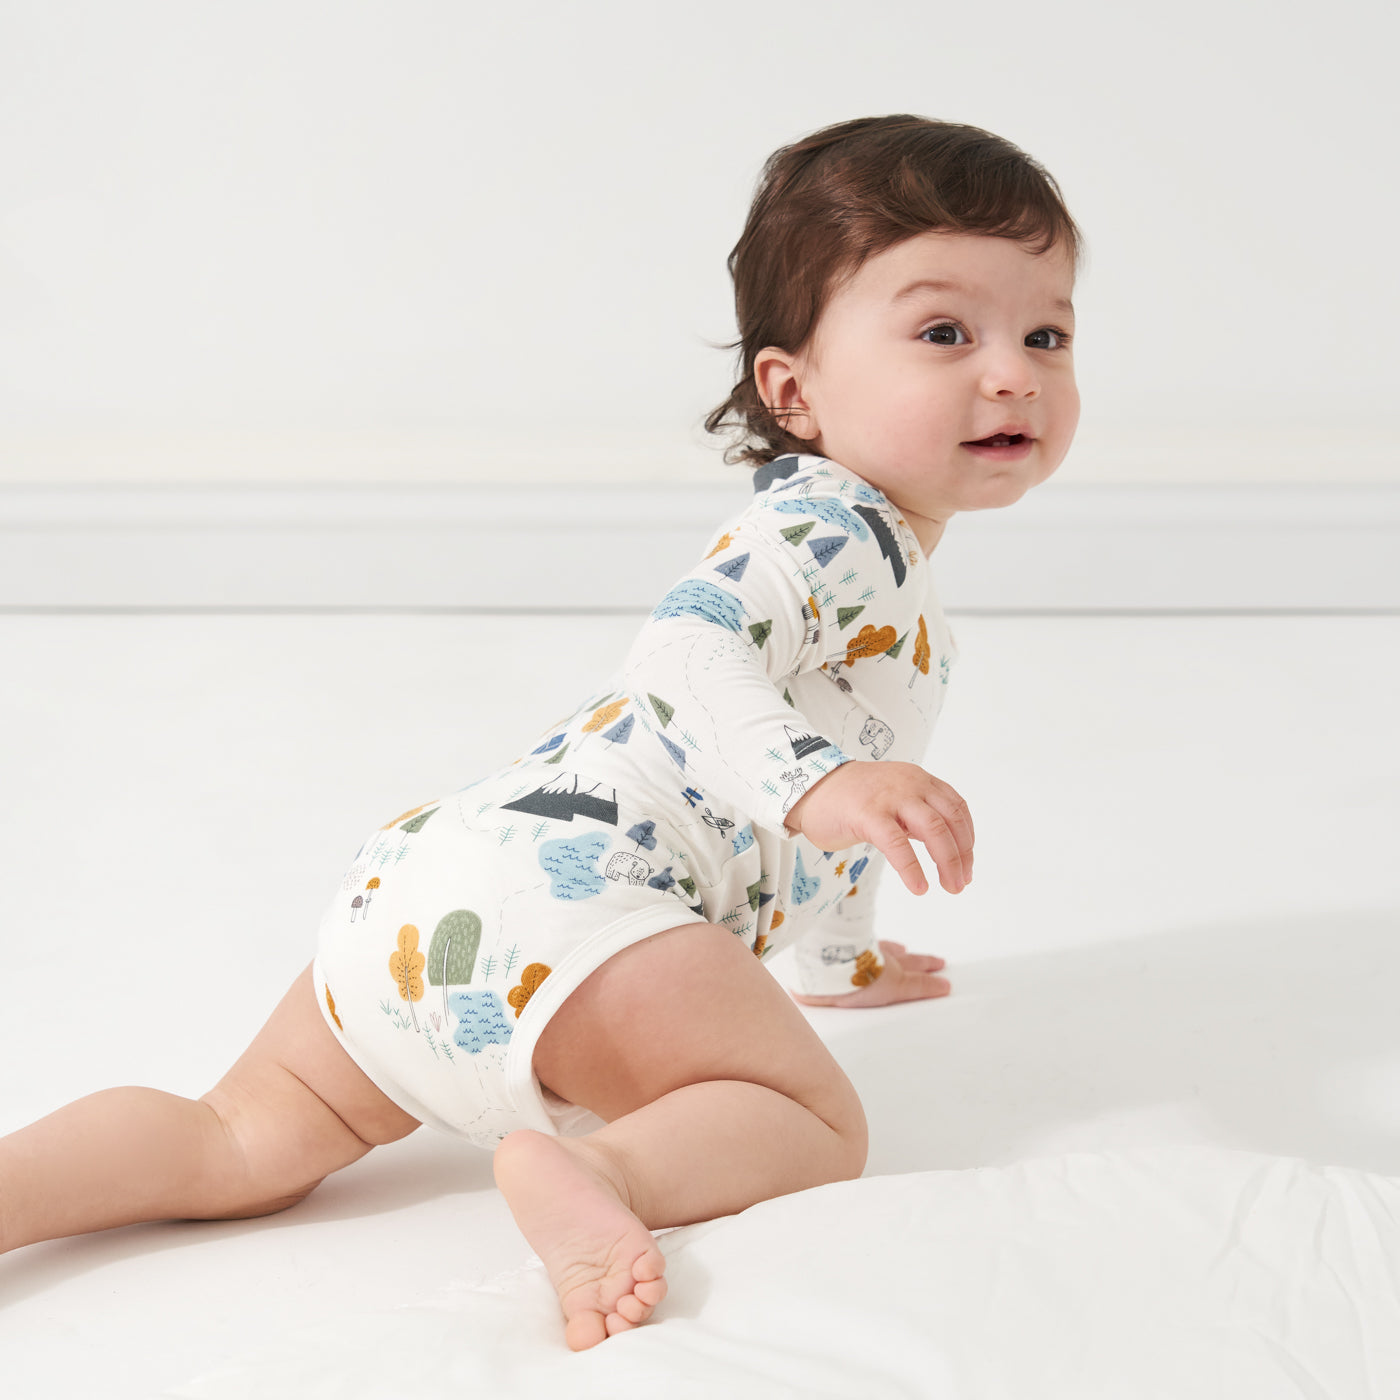 Child crawling on the floor wearing a Let's Explore printed bodysuit